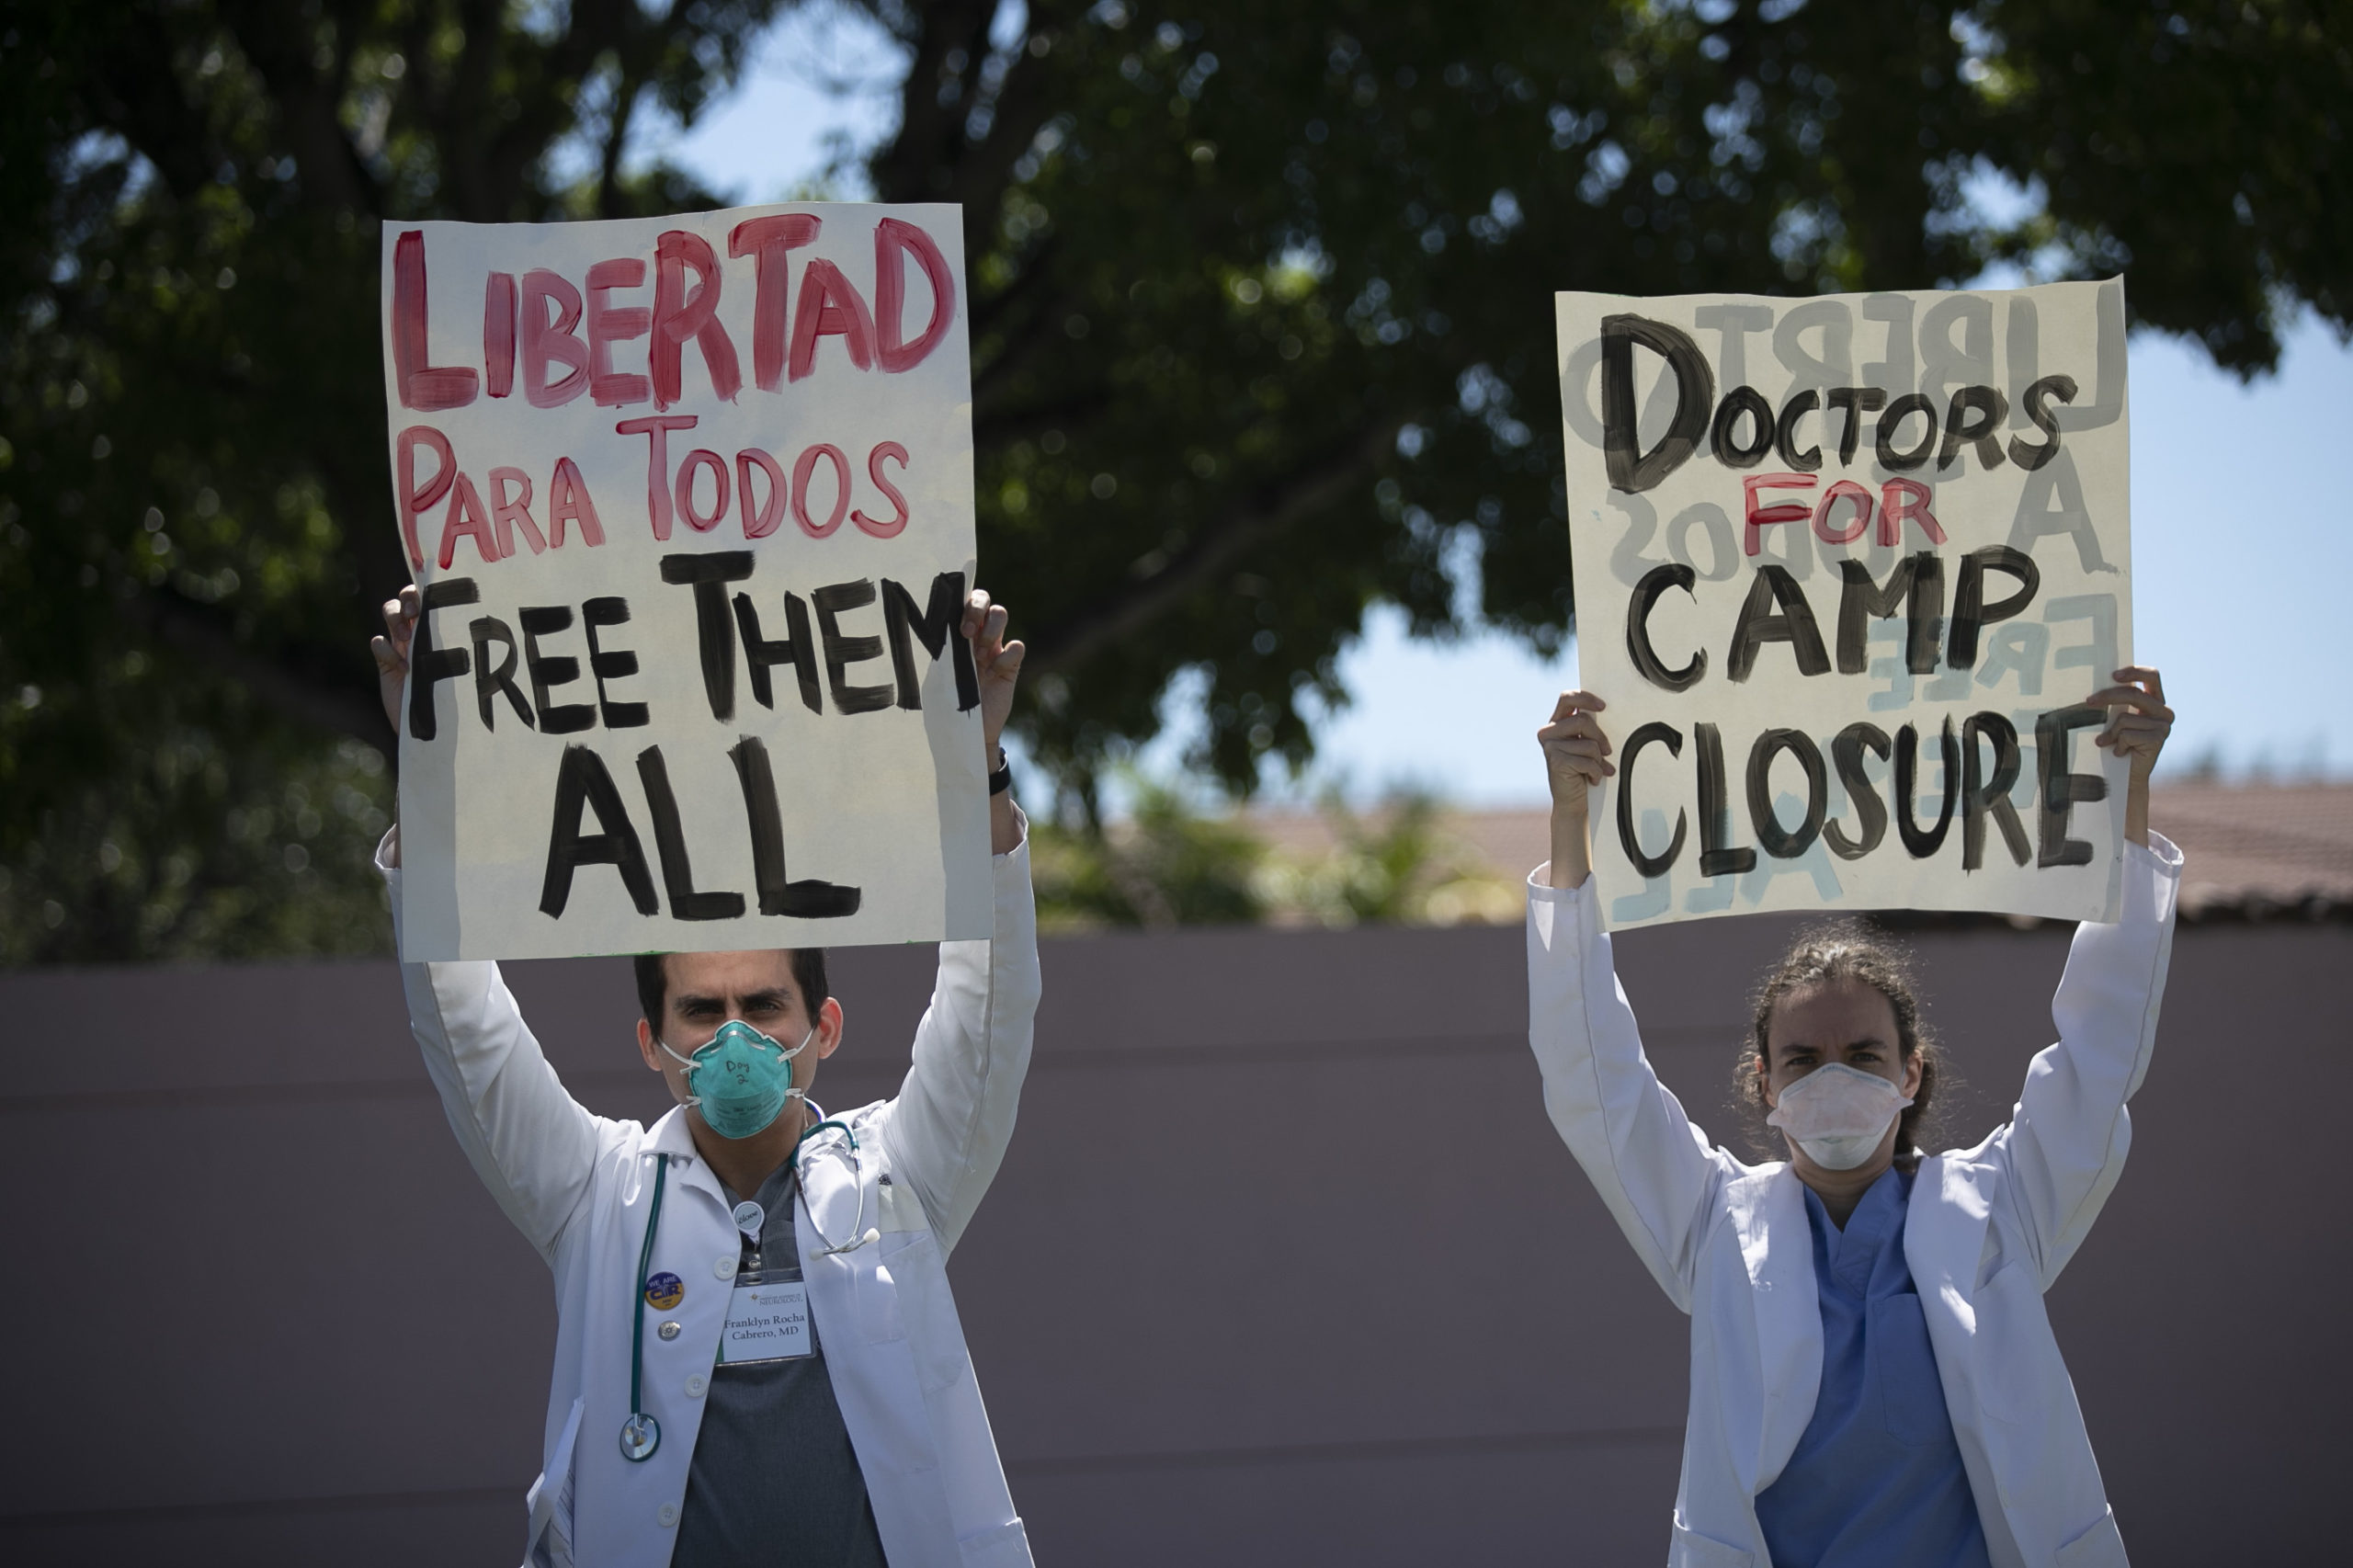 Dr. Franklyn Rocha Cabrero and Dr. Claudia A. Alvarez join with protesters outside of the Immigration and Customs Enforcement's Broward Transitional Center on May 01, 2020 in Pompano Beach, Florida. (Joe Raedle/Getty Images)